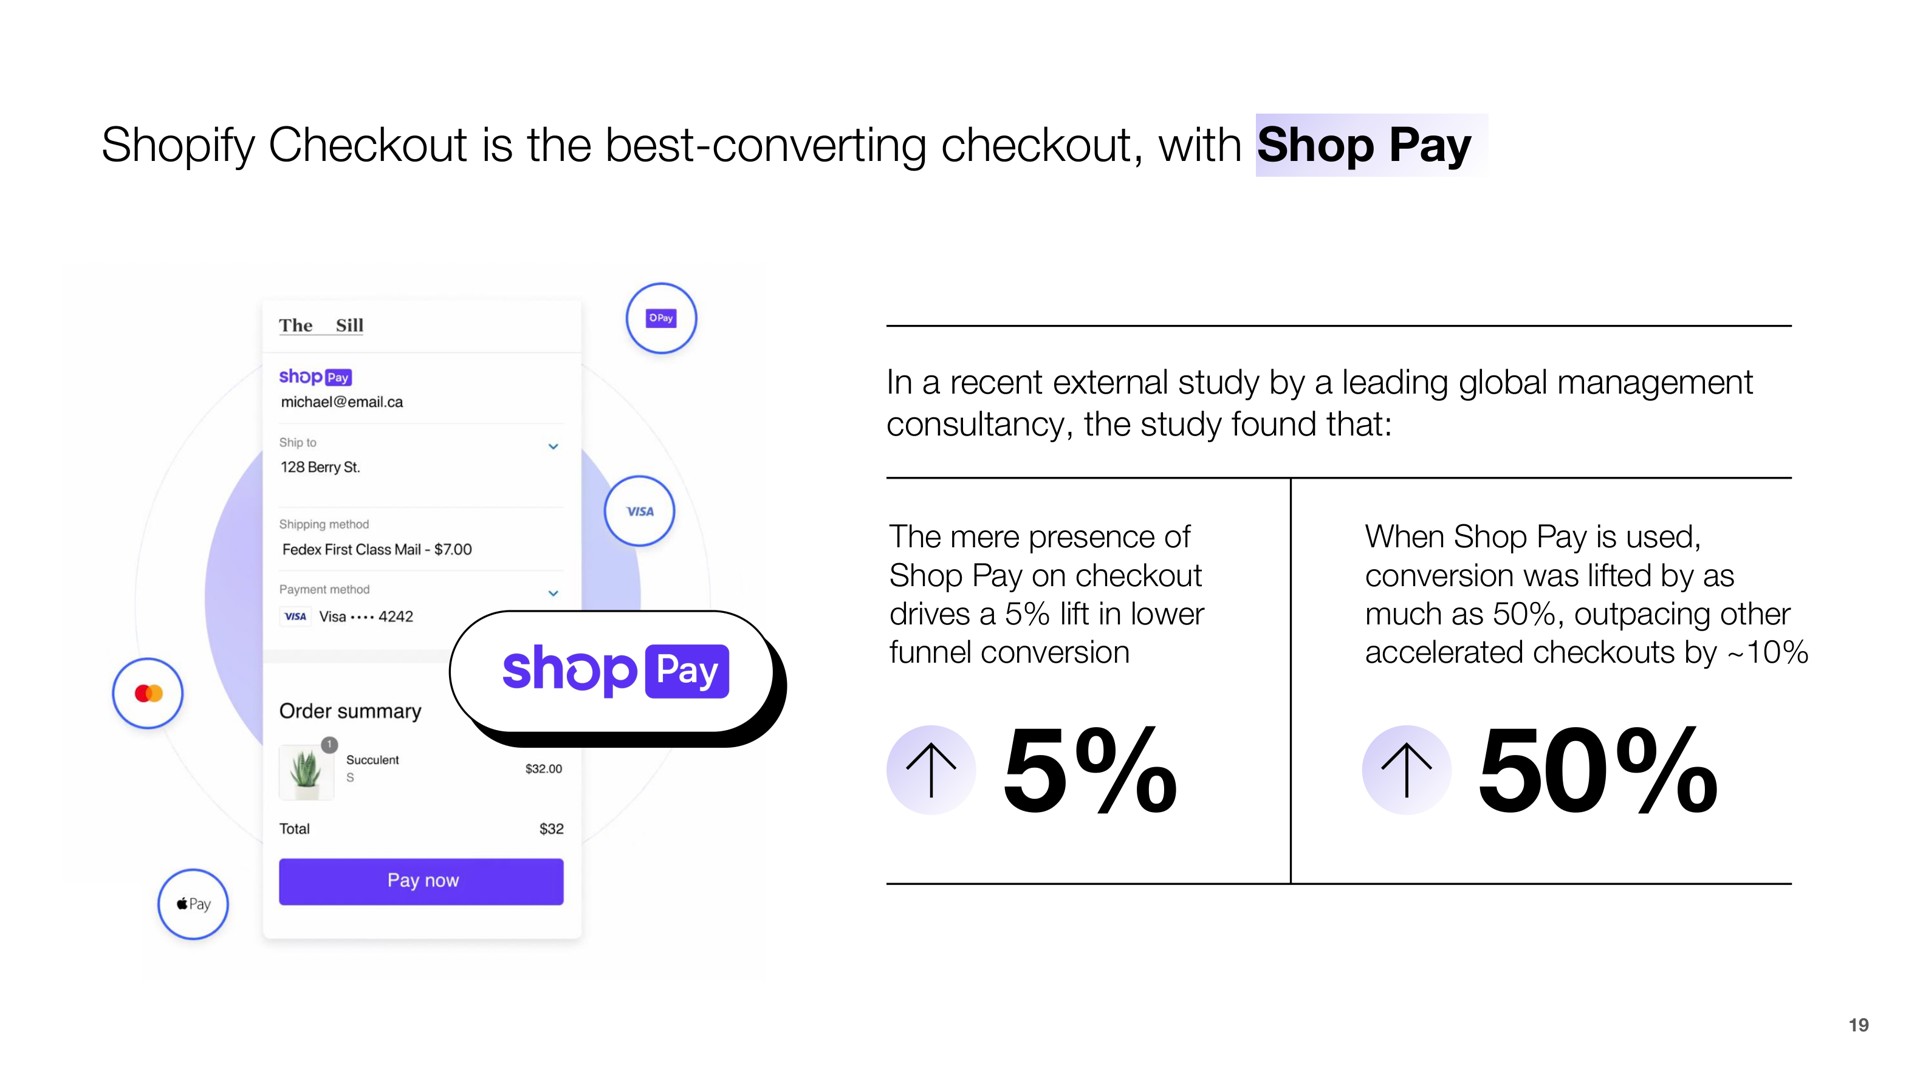 is the best converting with shop pay an | Shopify